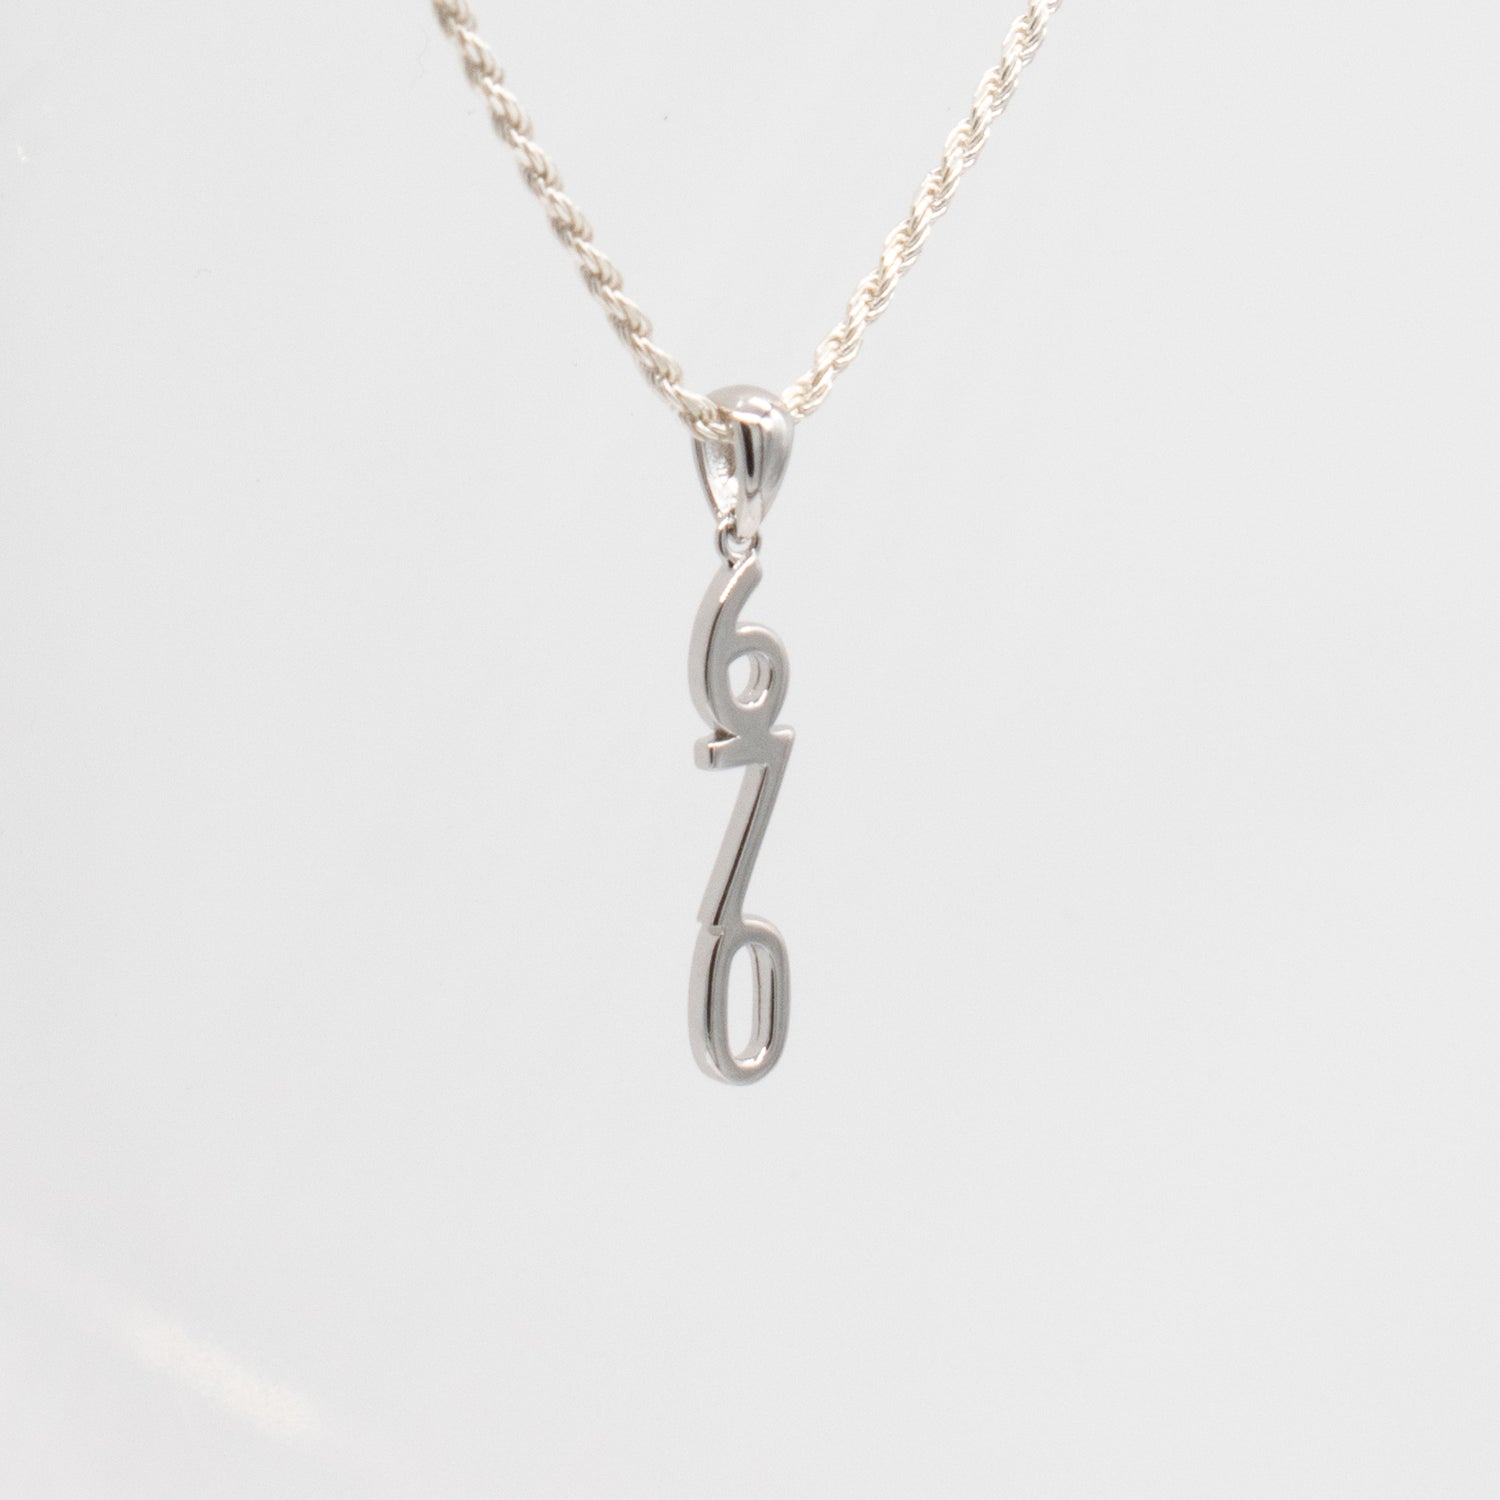 Sterling Silver and Rhodium 670 Necklace with Adjustable Chain